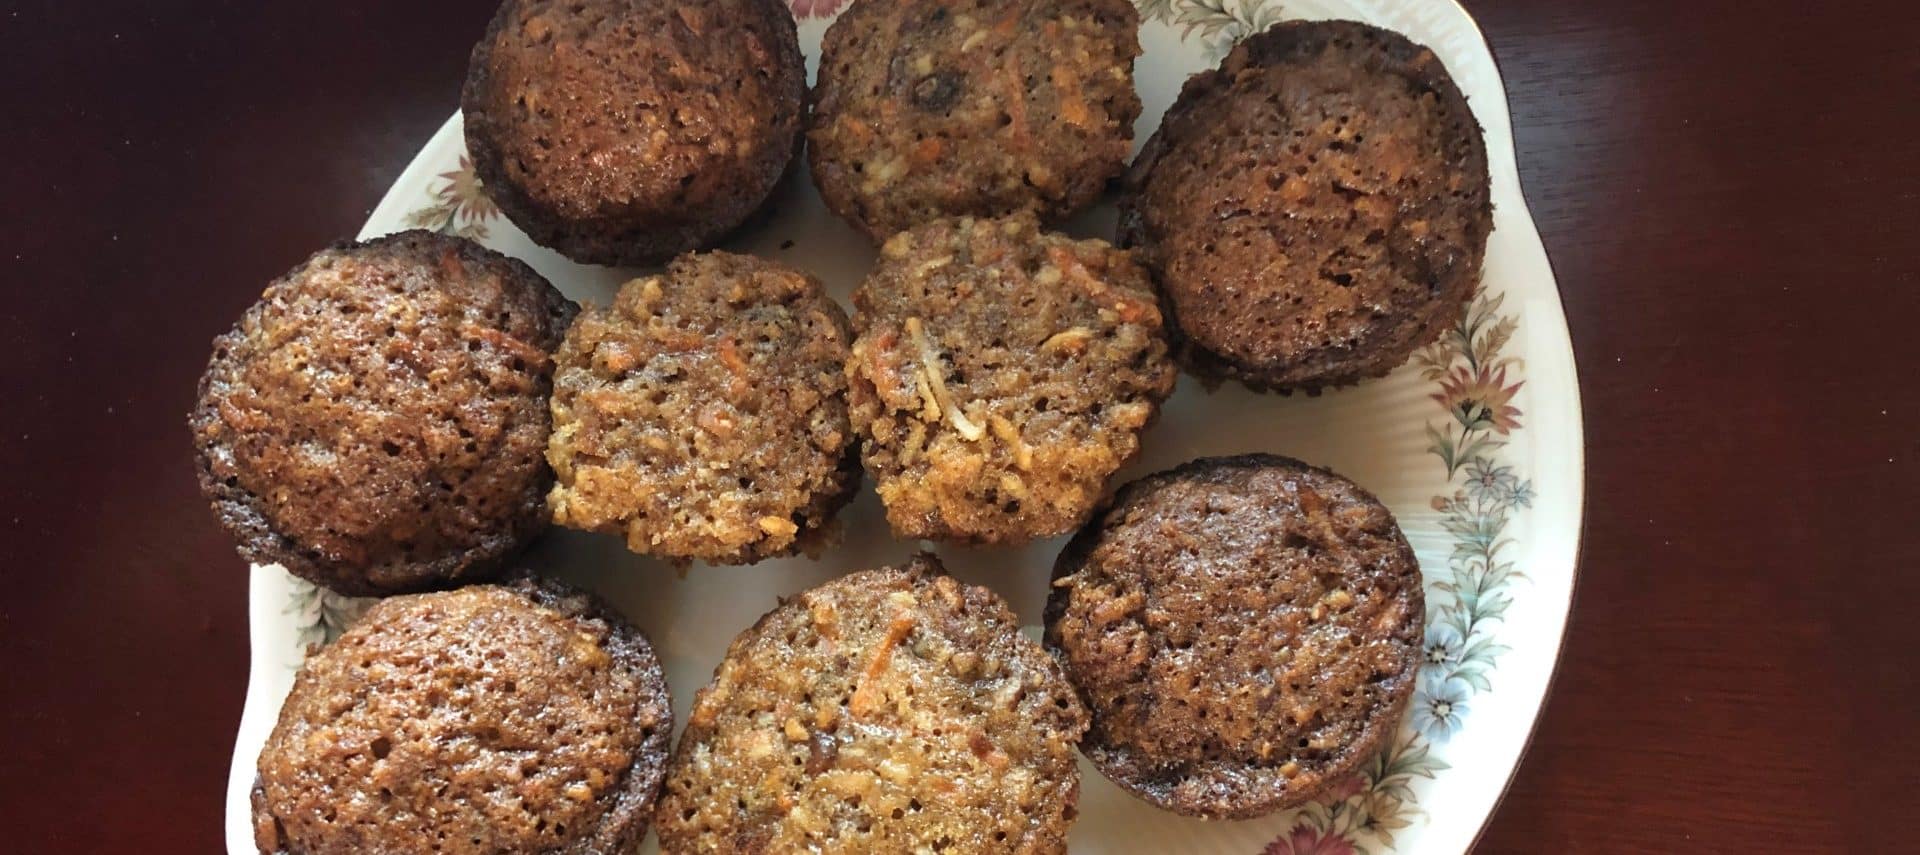 A plate of nine Morning Glory Muffins